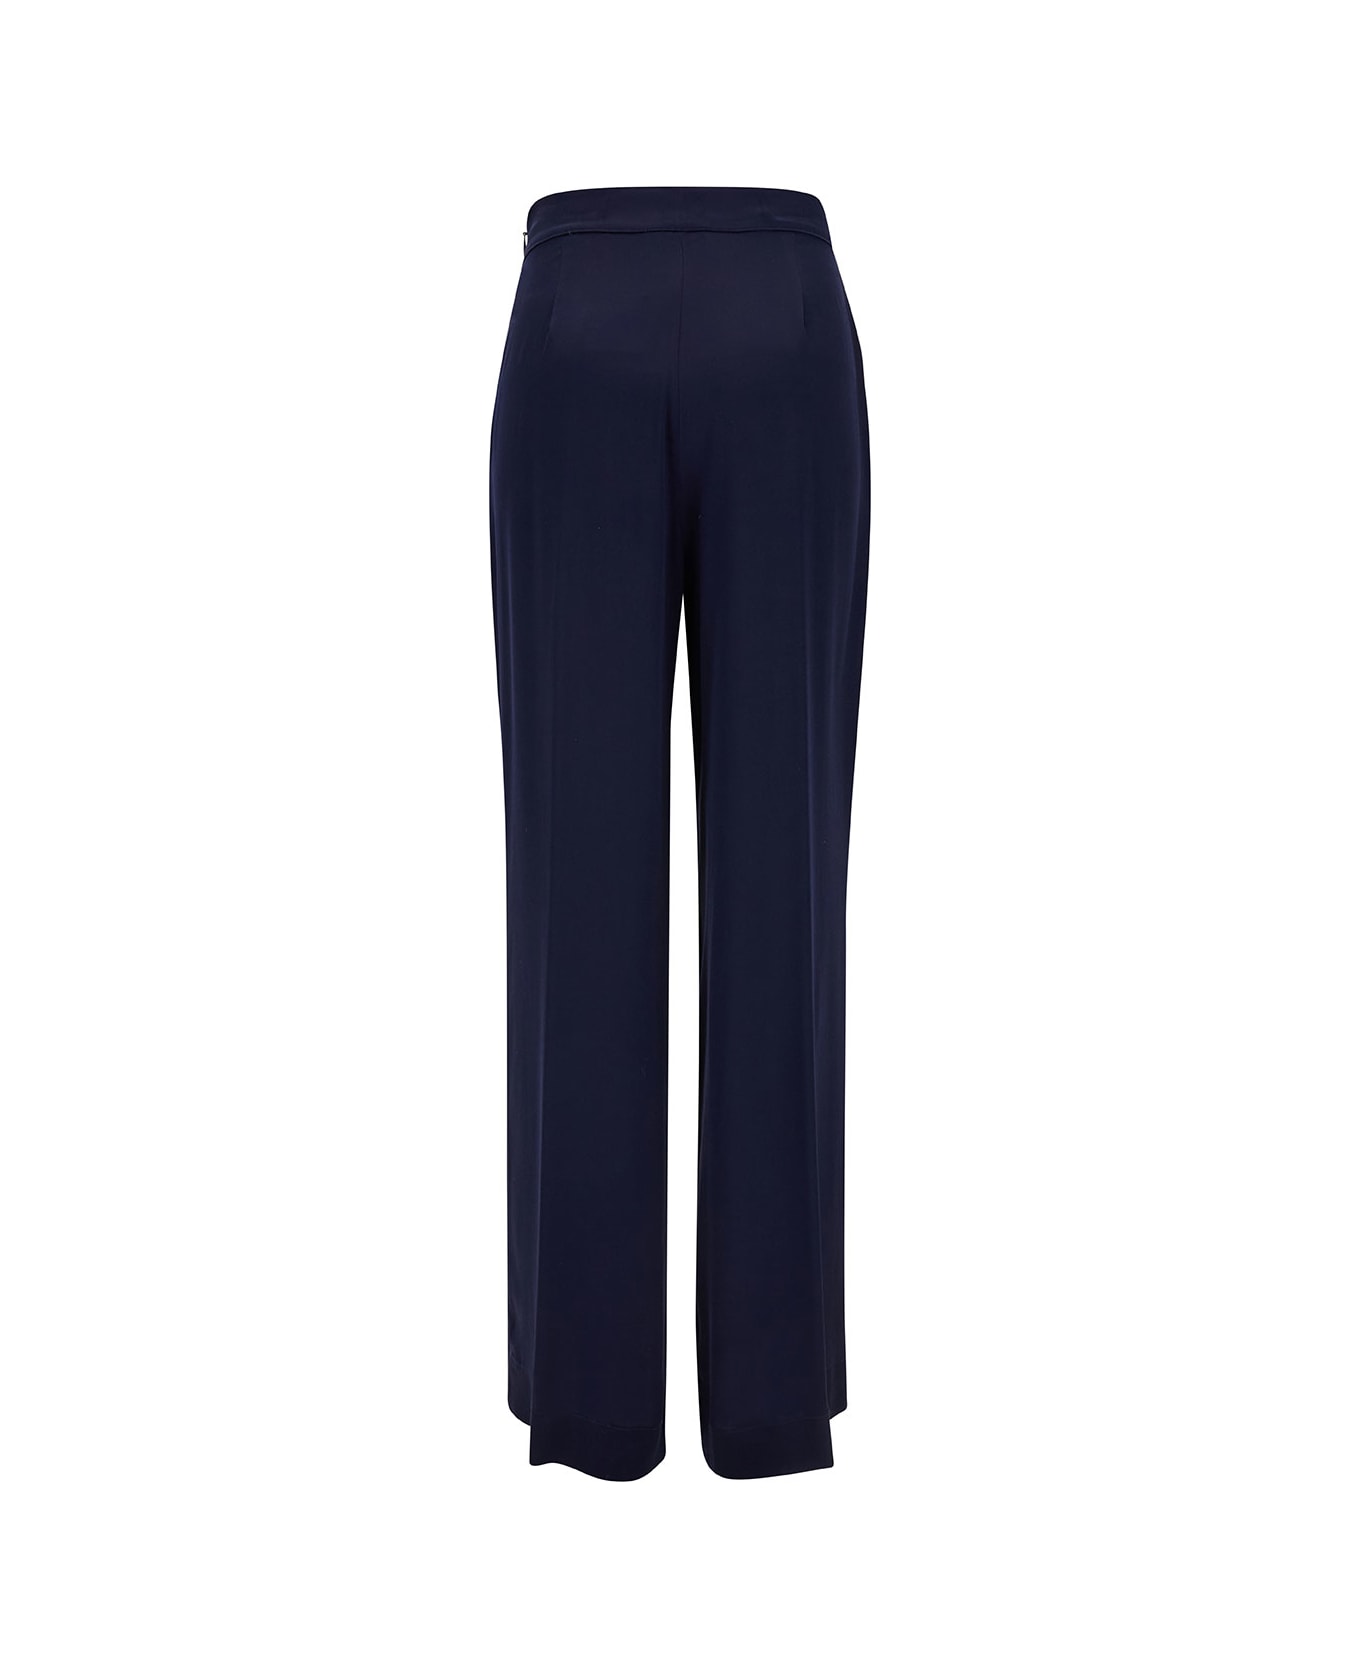 SEMICOUTURE 'emerson' Blue Straight Loose Pants In Acetate And Silk Blend Woman - Blu